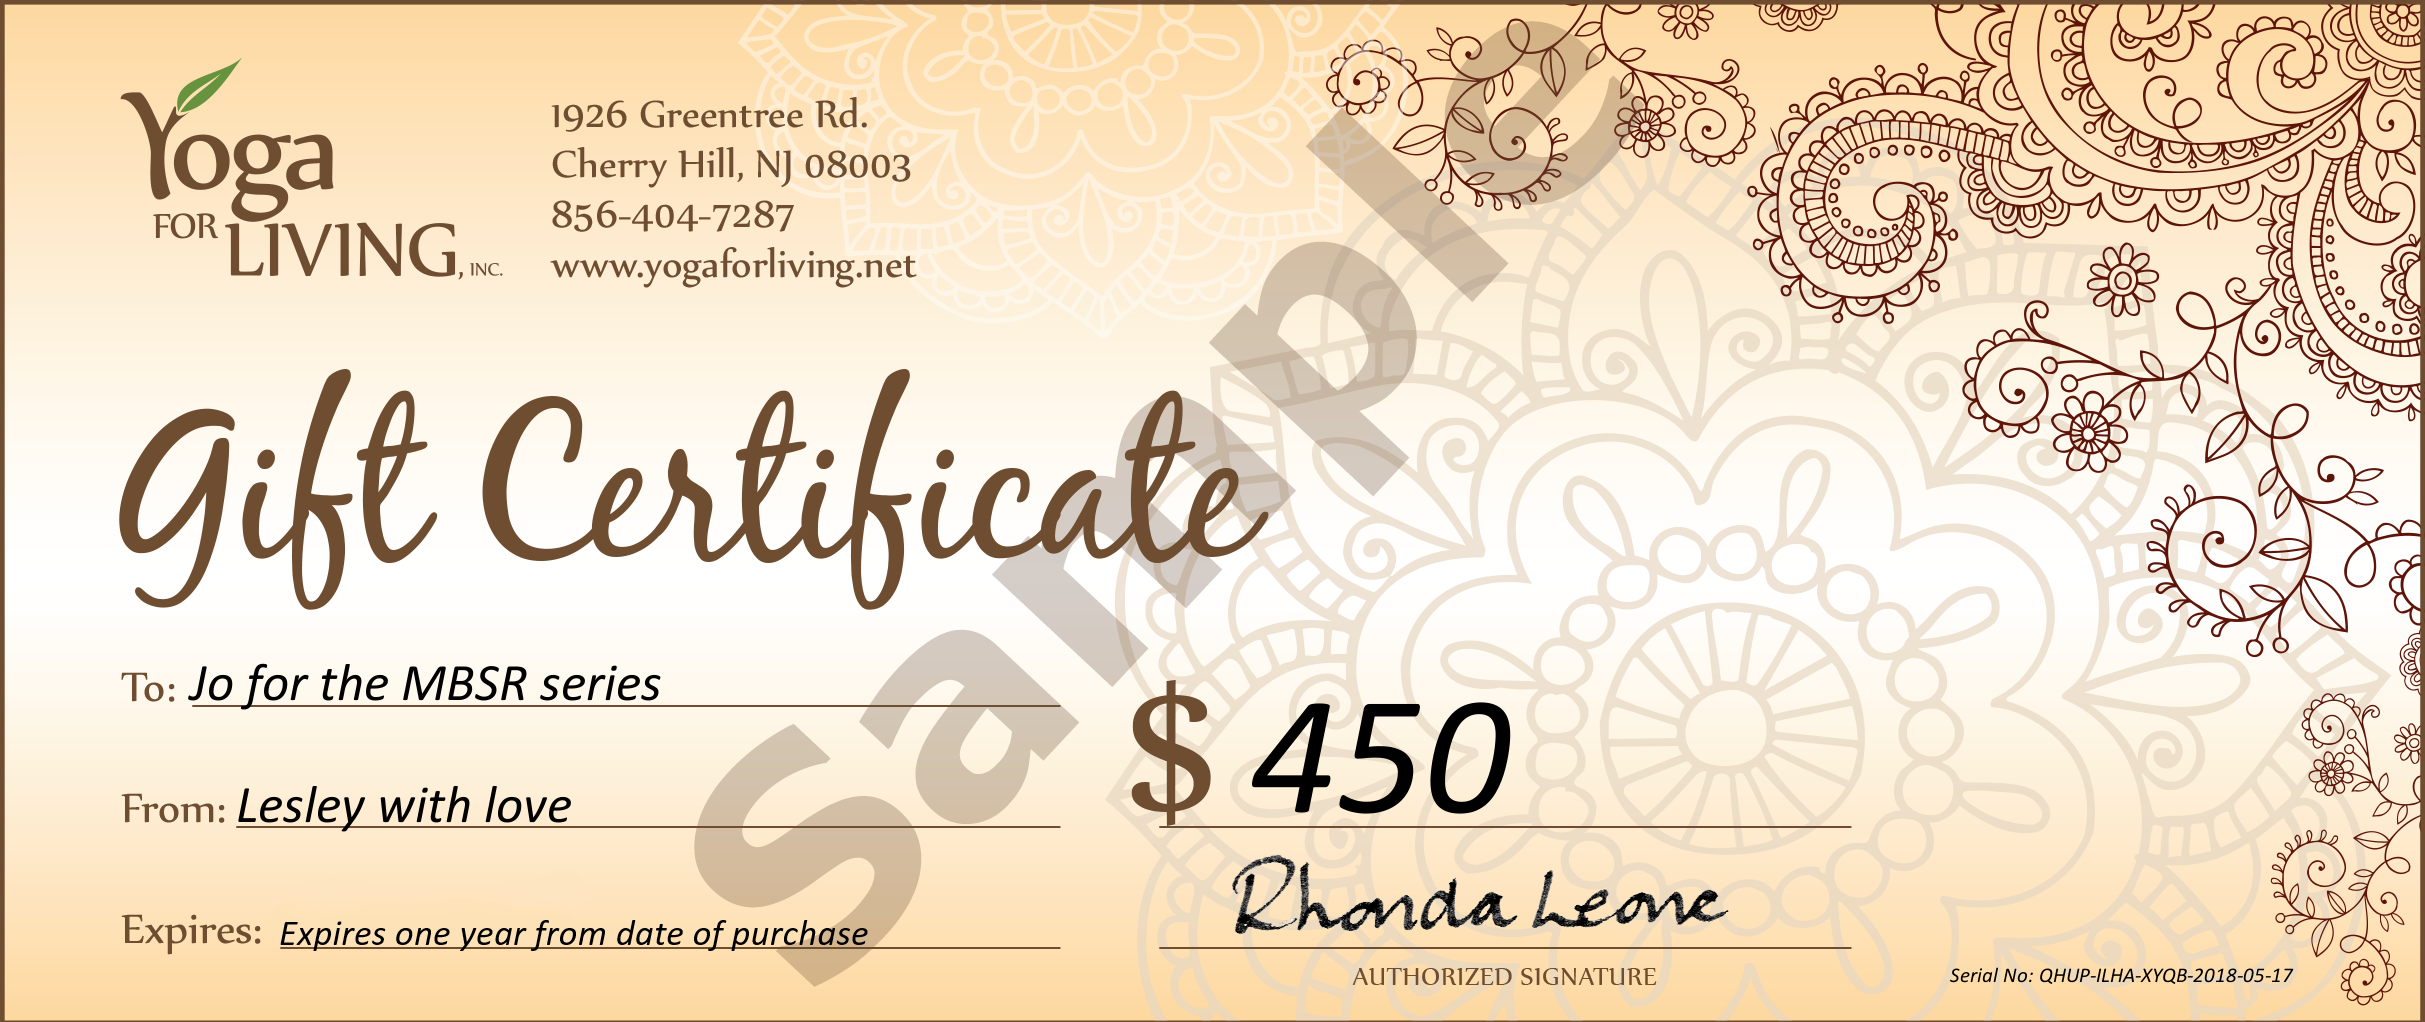 Gift Certifcates from Yoga For Living, Cherry Hill, South Jersey, NJ